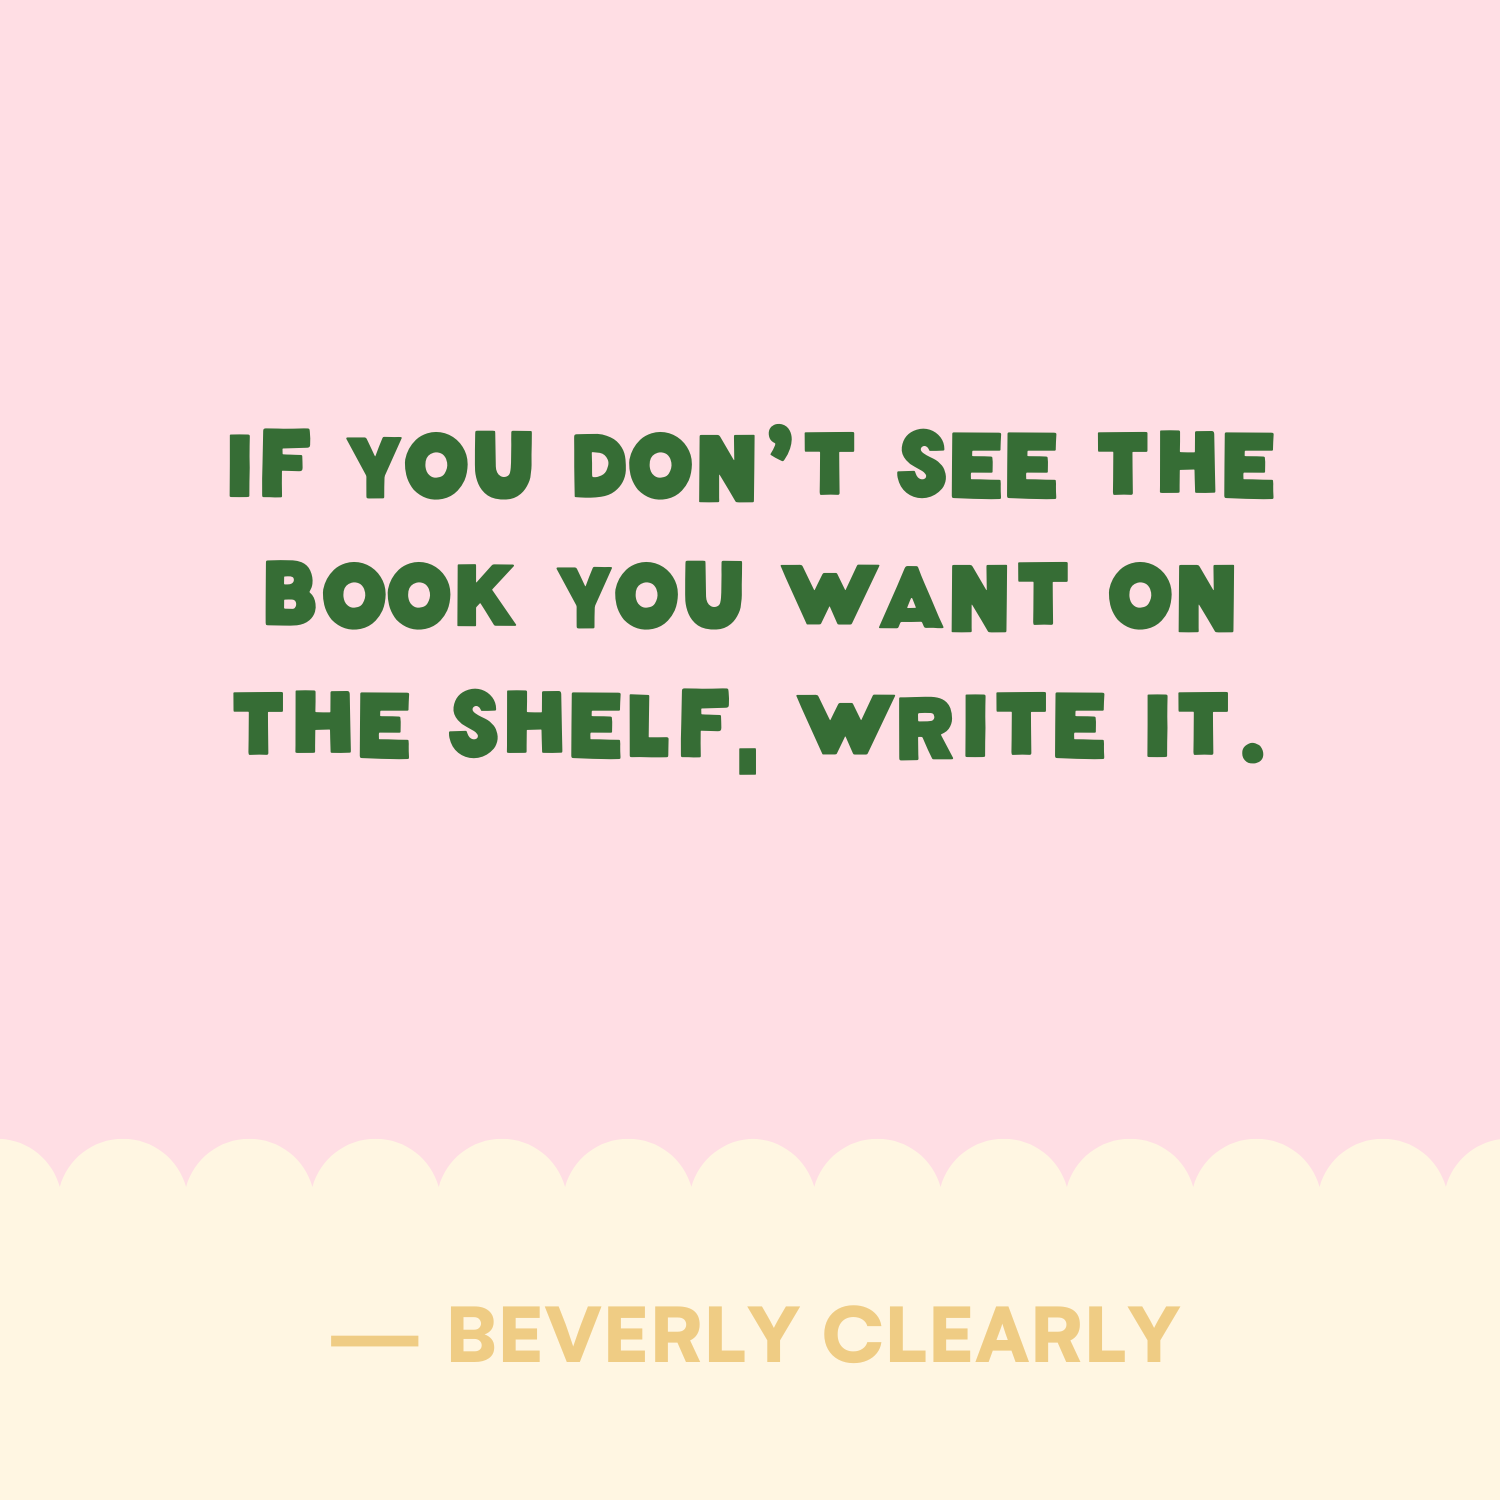 <p>"If you don't see the book you want on the shelf, write it." —Beverly Clearly </p>